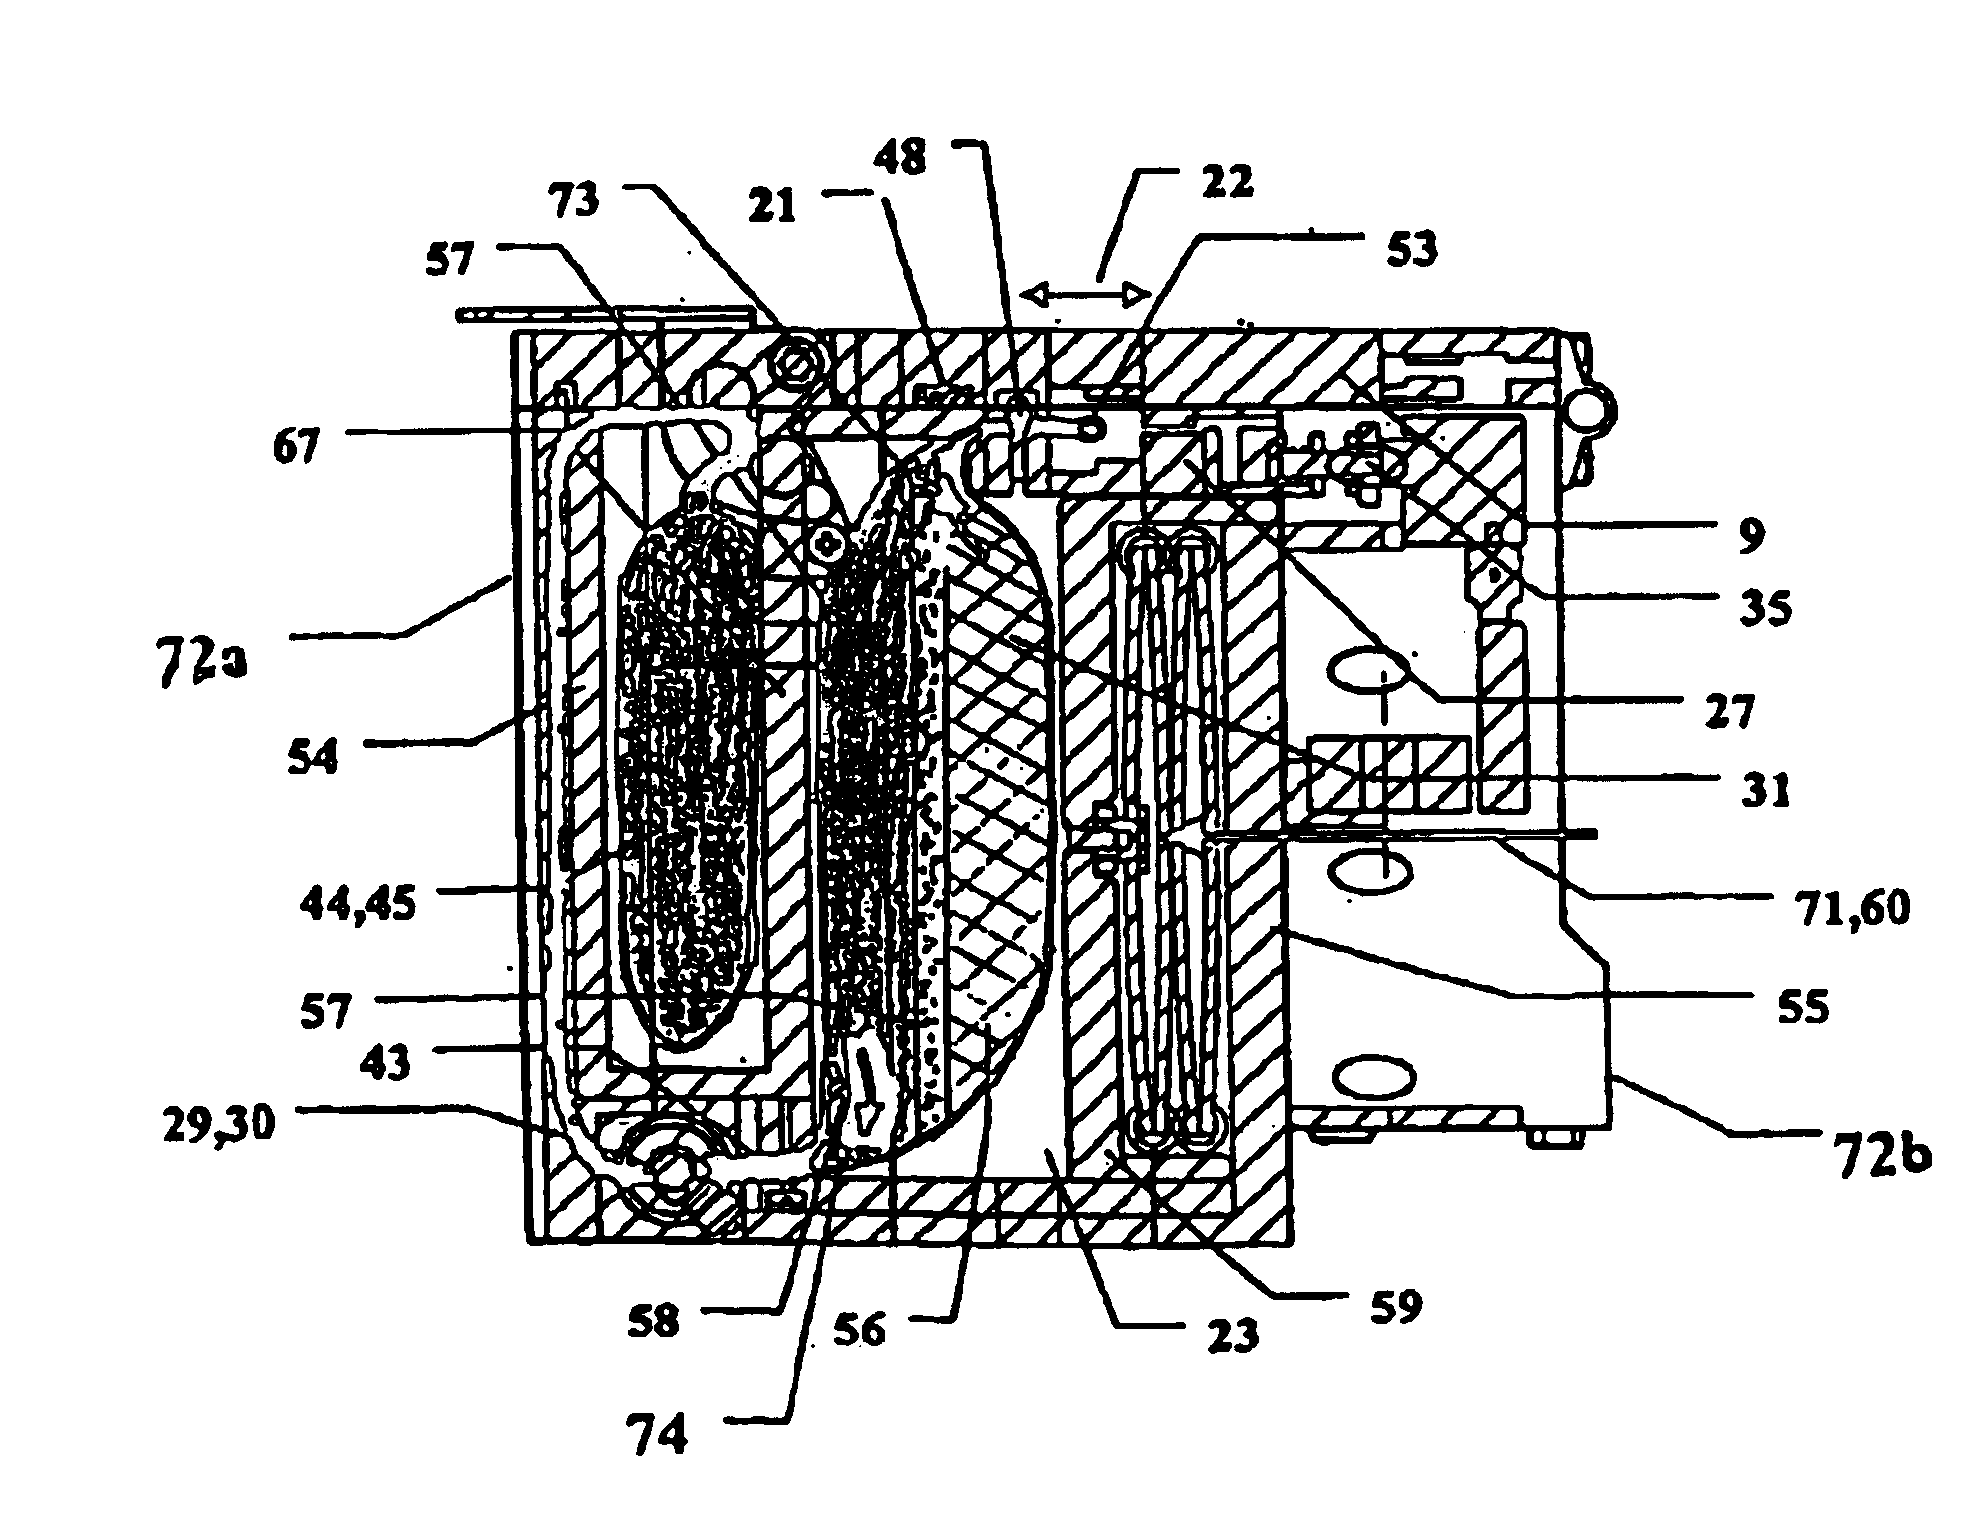 Centrifuge comprising a blood bag system with an upper and lower outlet